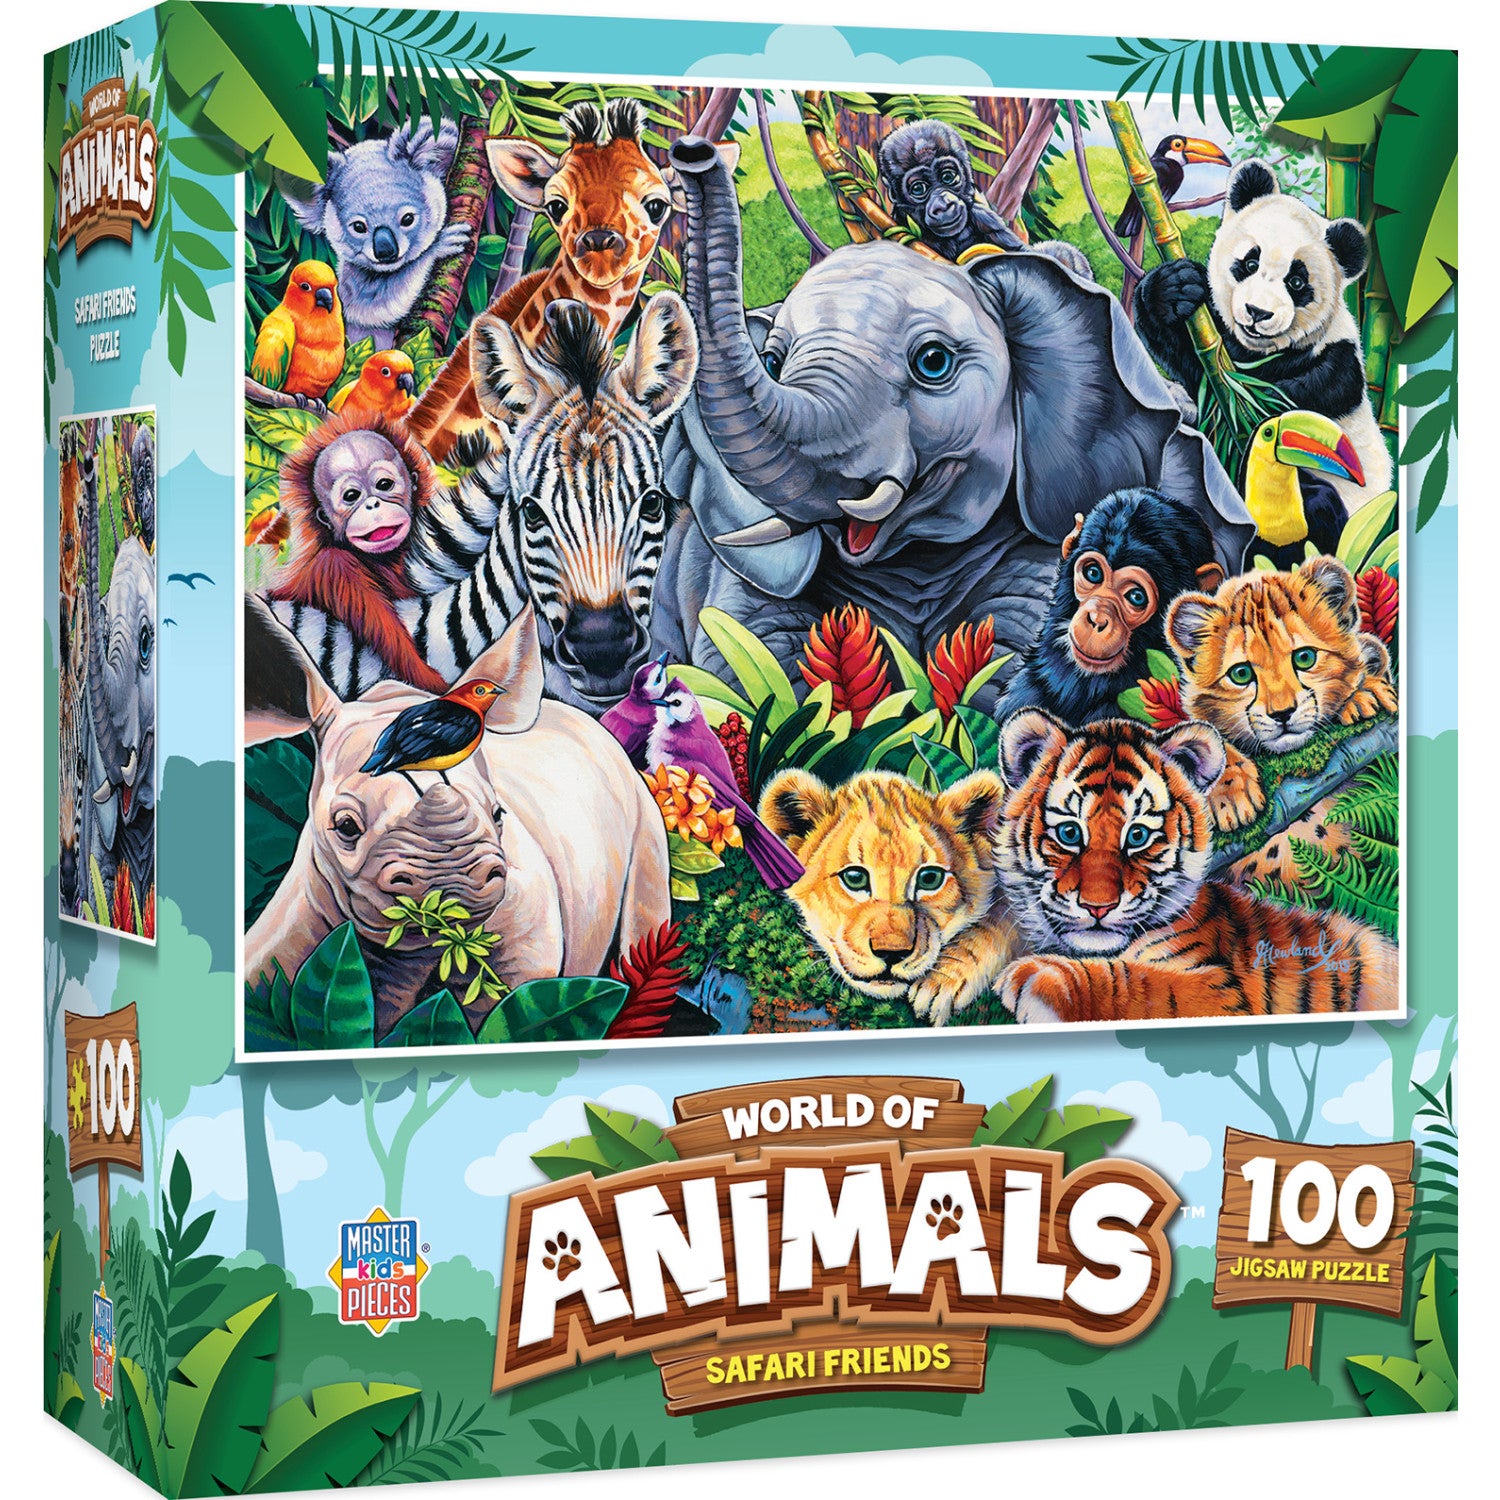 World of Animals - Reptile Friends 100 Piece Puzzle